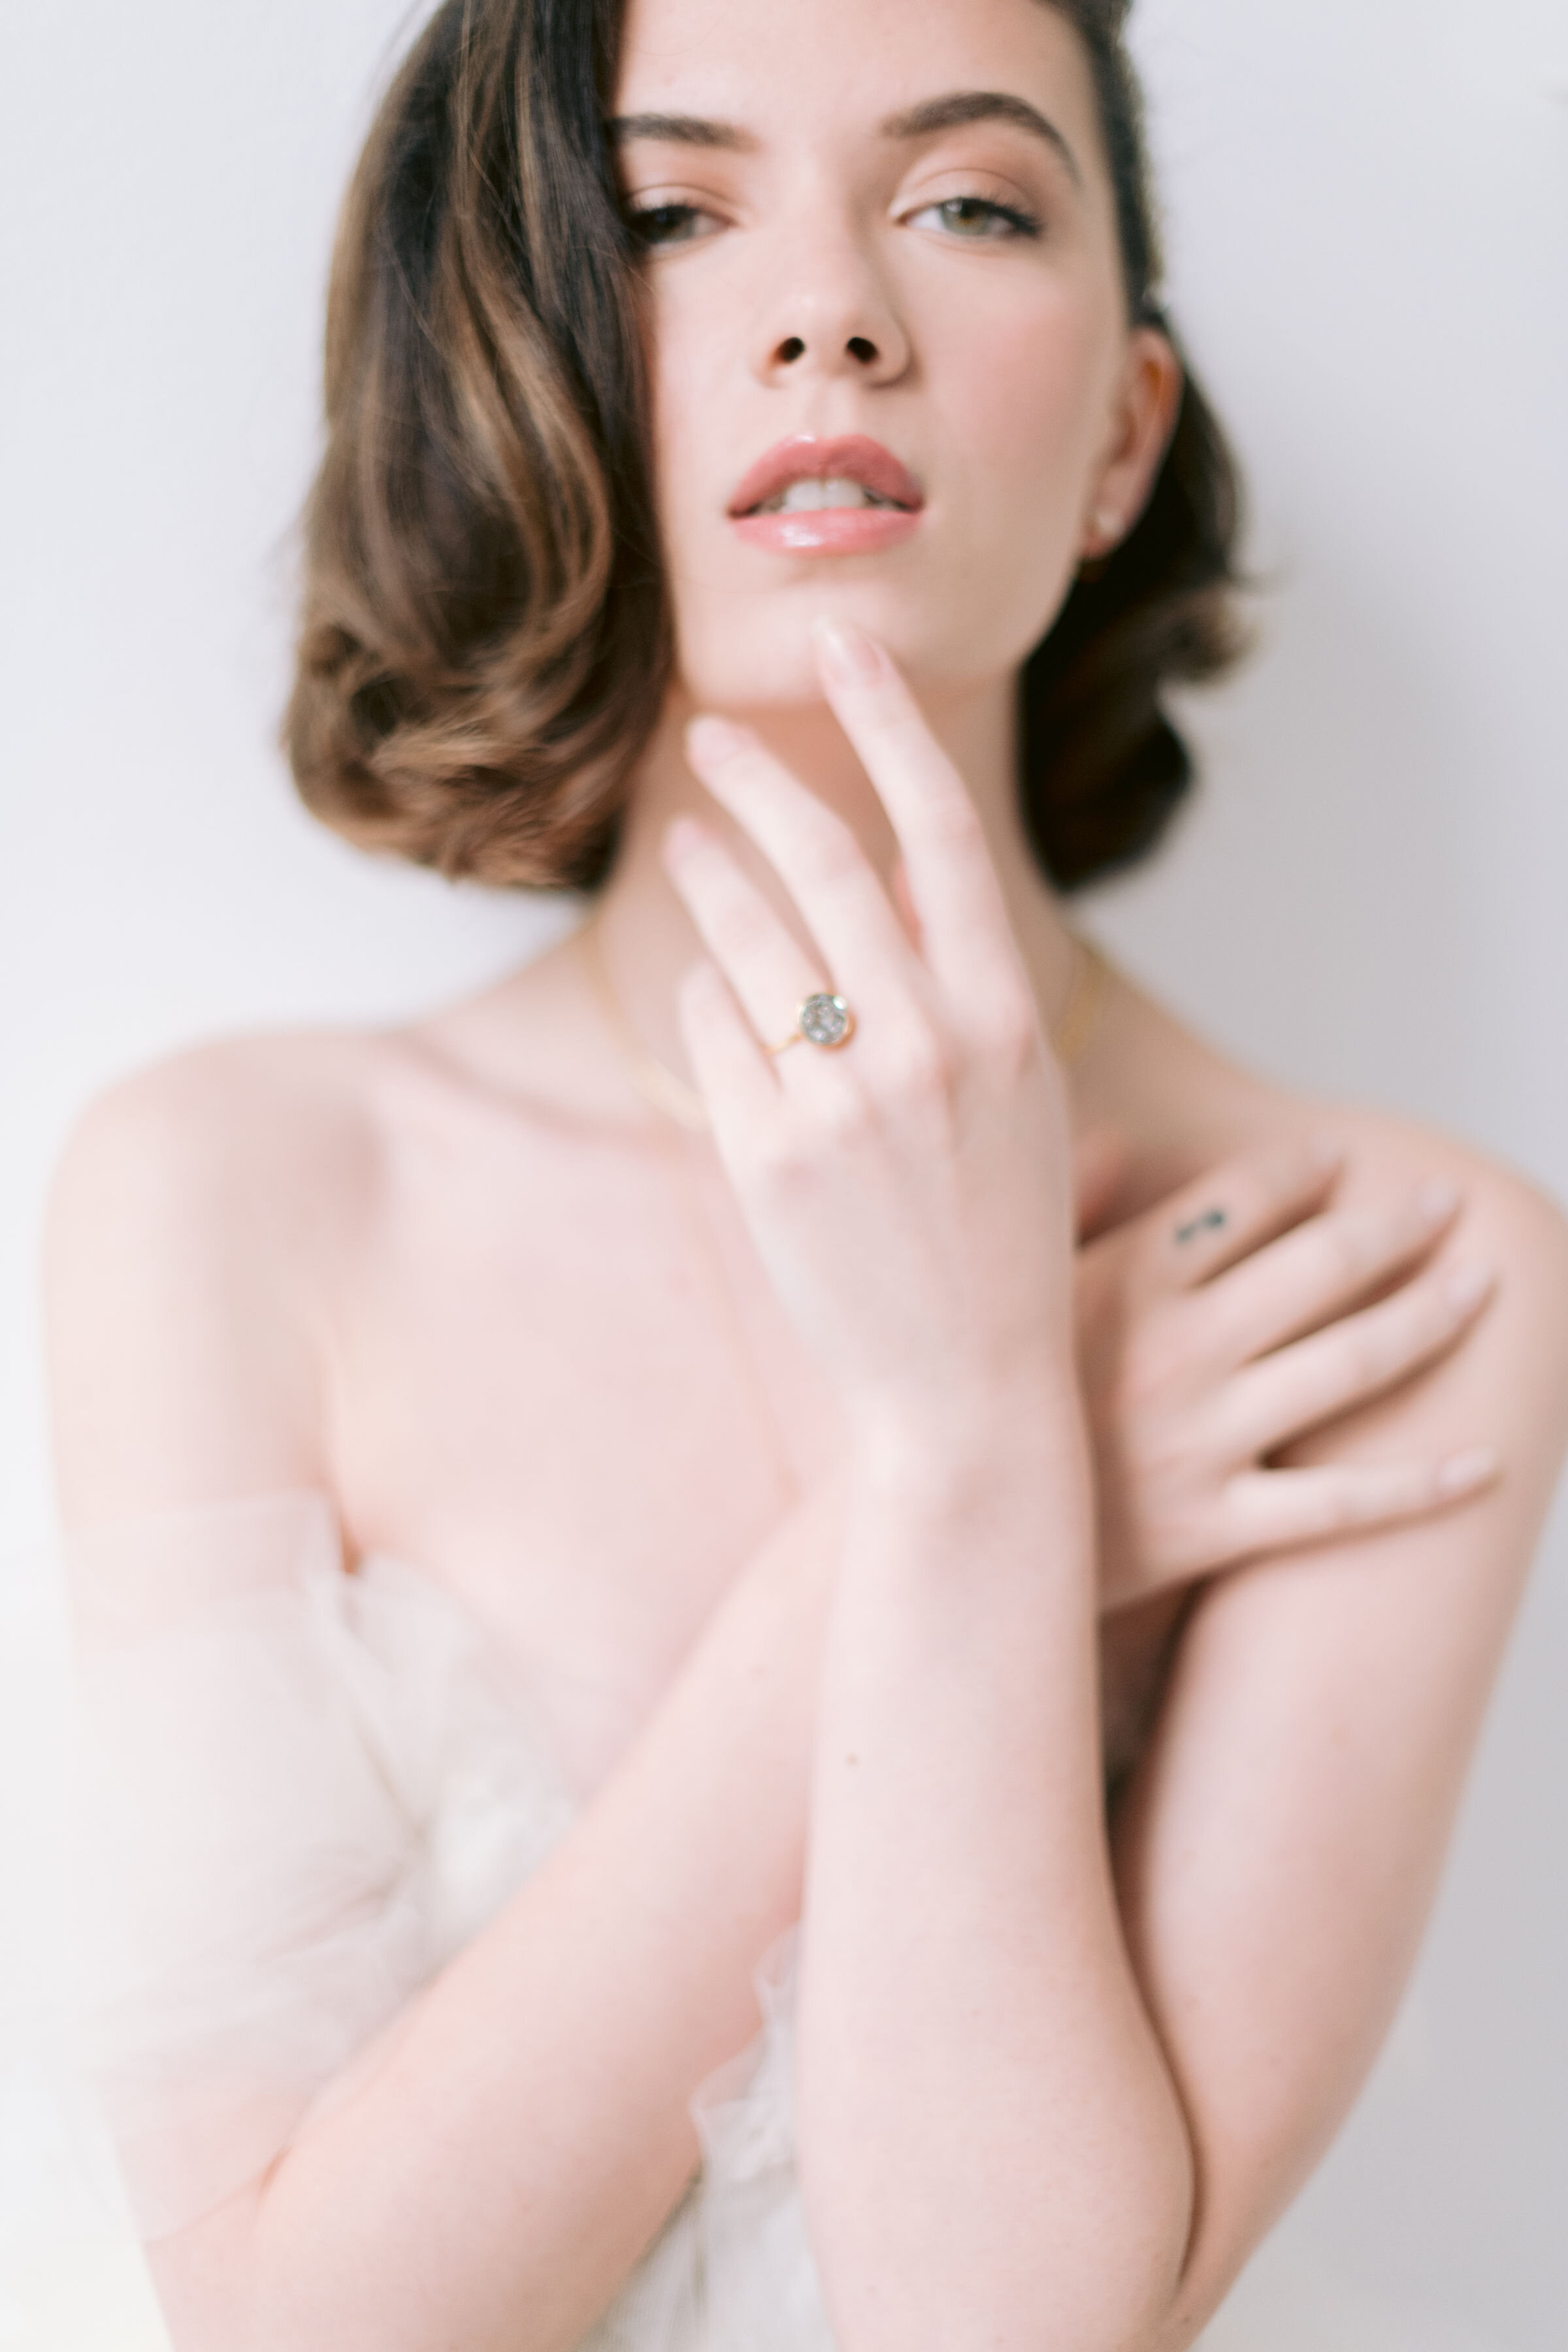 The Complete Guide to Natural Looking Wedding Day Beauty